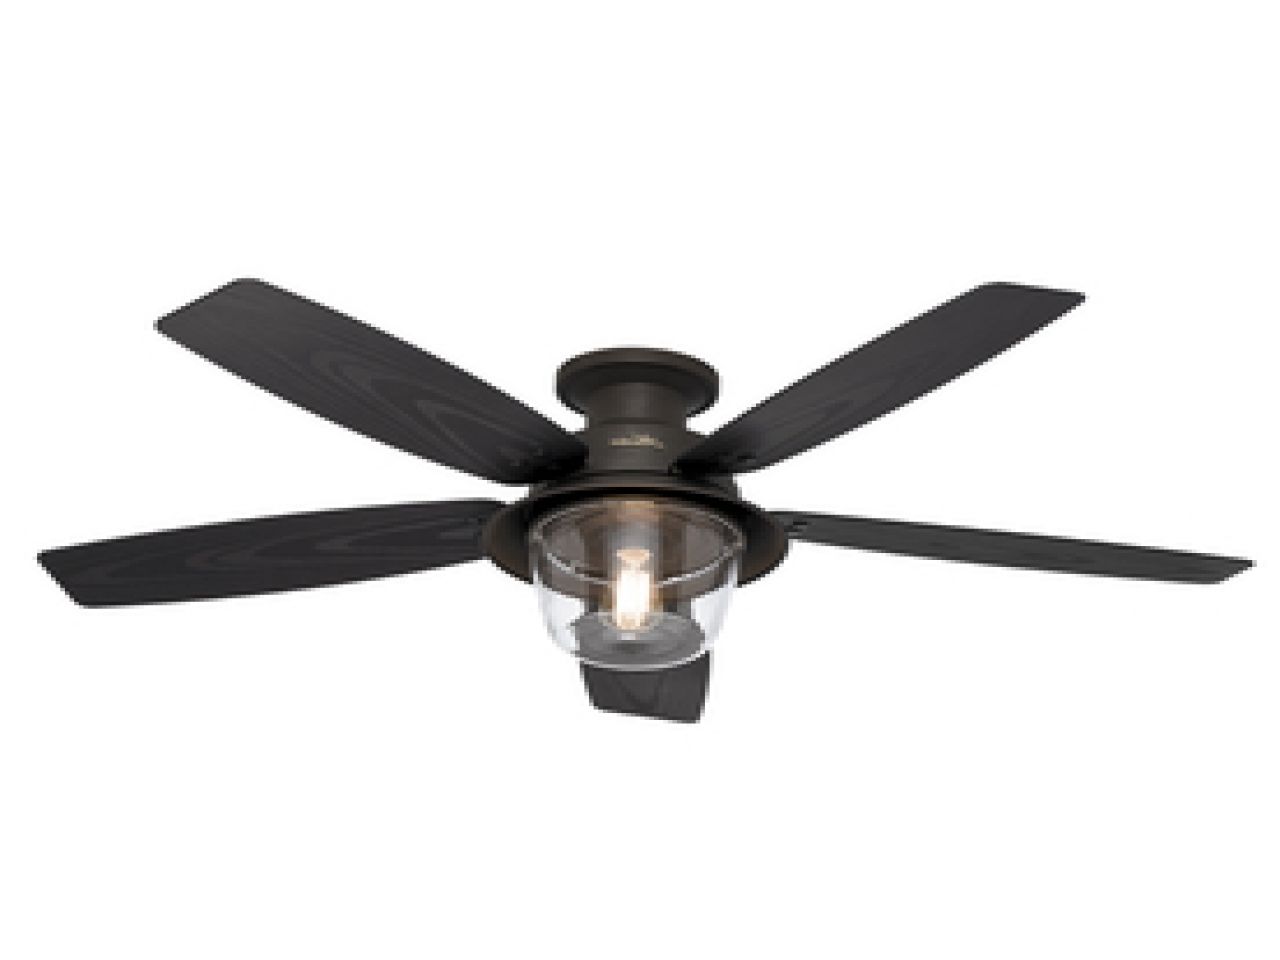 Wet Rated Outdoor Ceiling Fans With Light For Recent Ceiling: Inspiring Outdoor Ceiling Fans Wet Rated Ceiling Fans For (View 3 of 20)